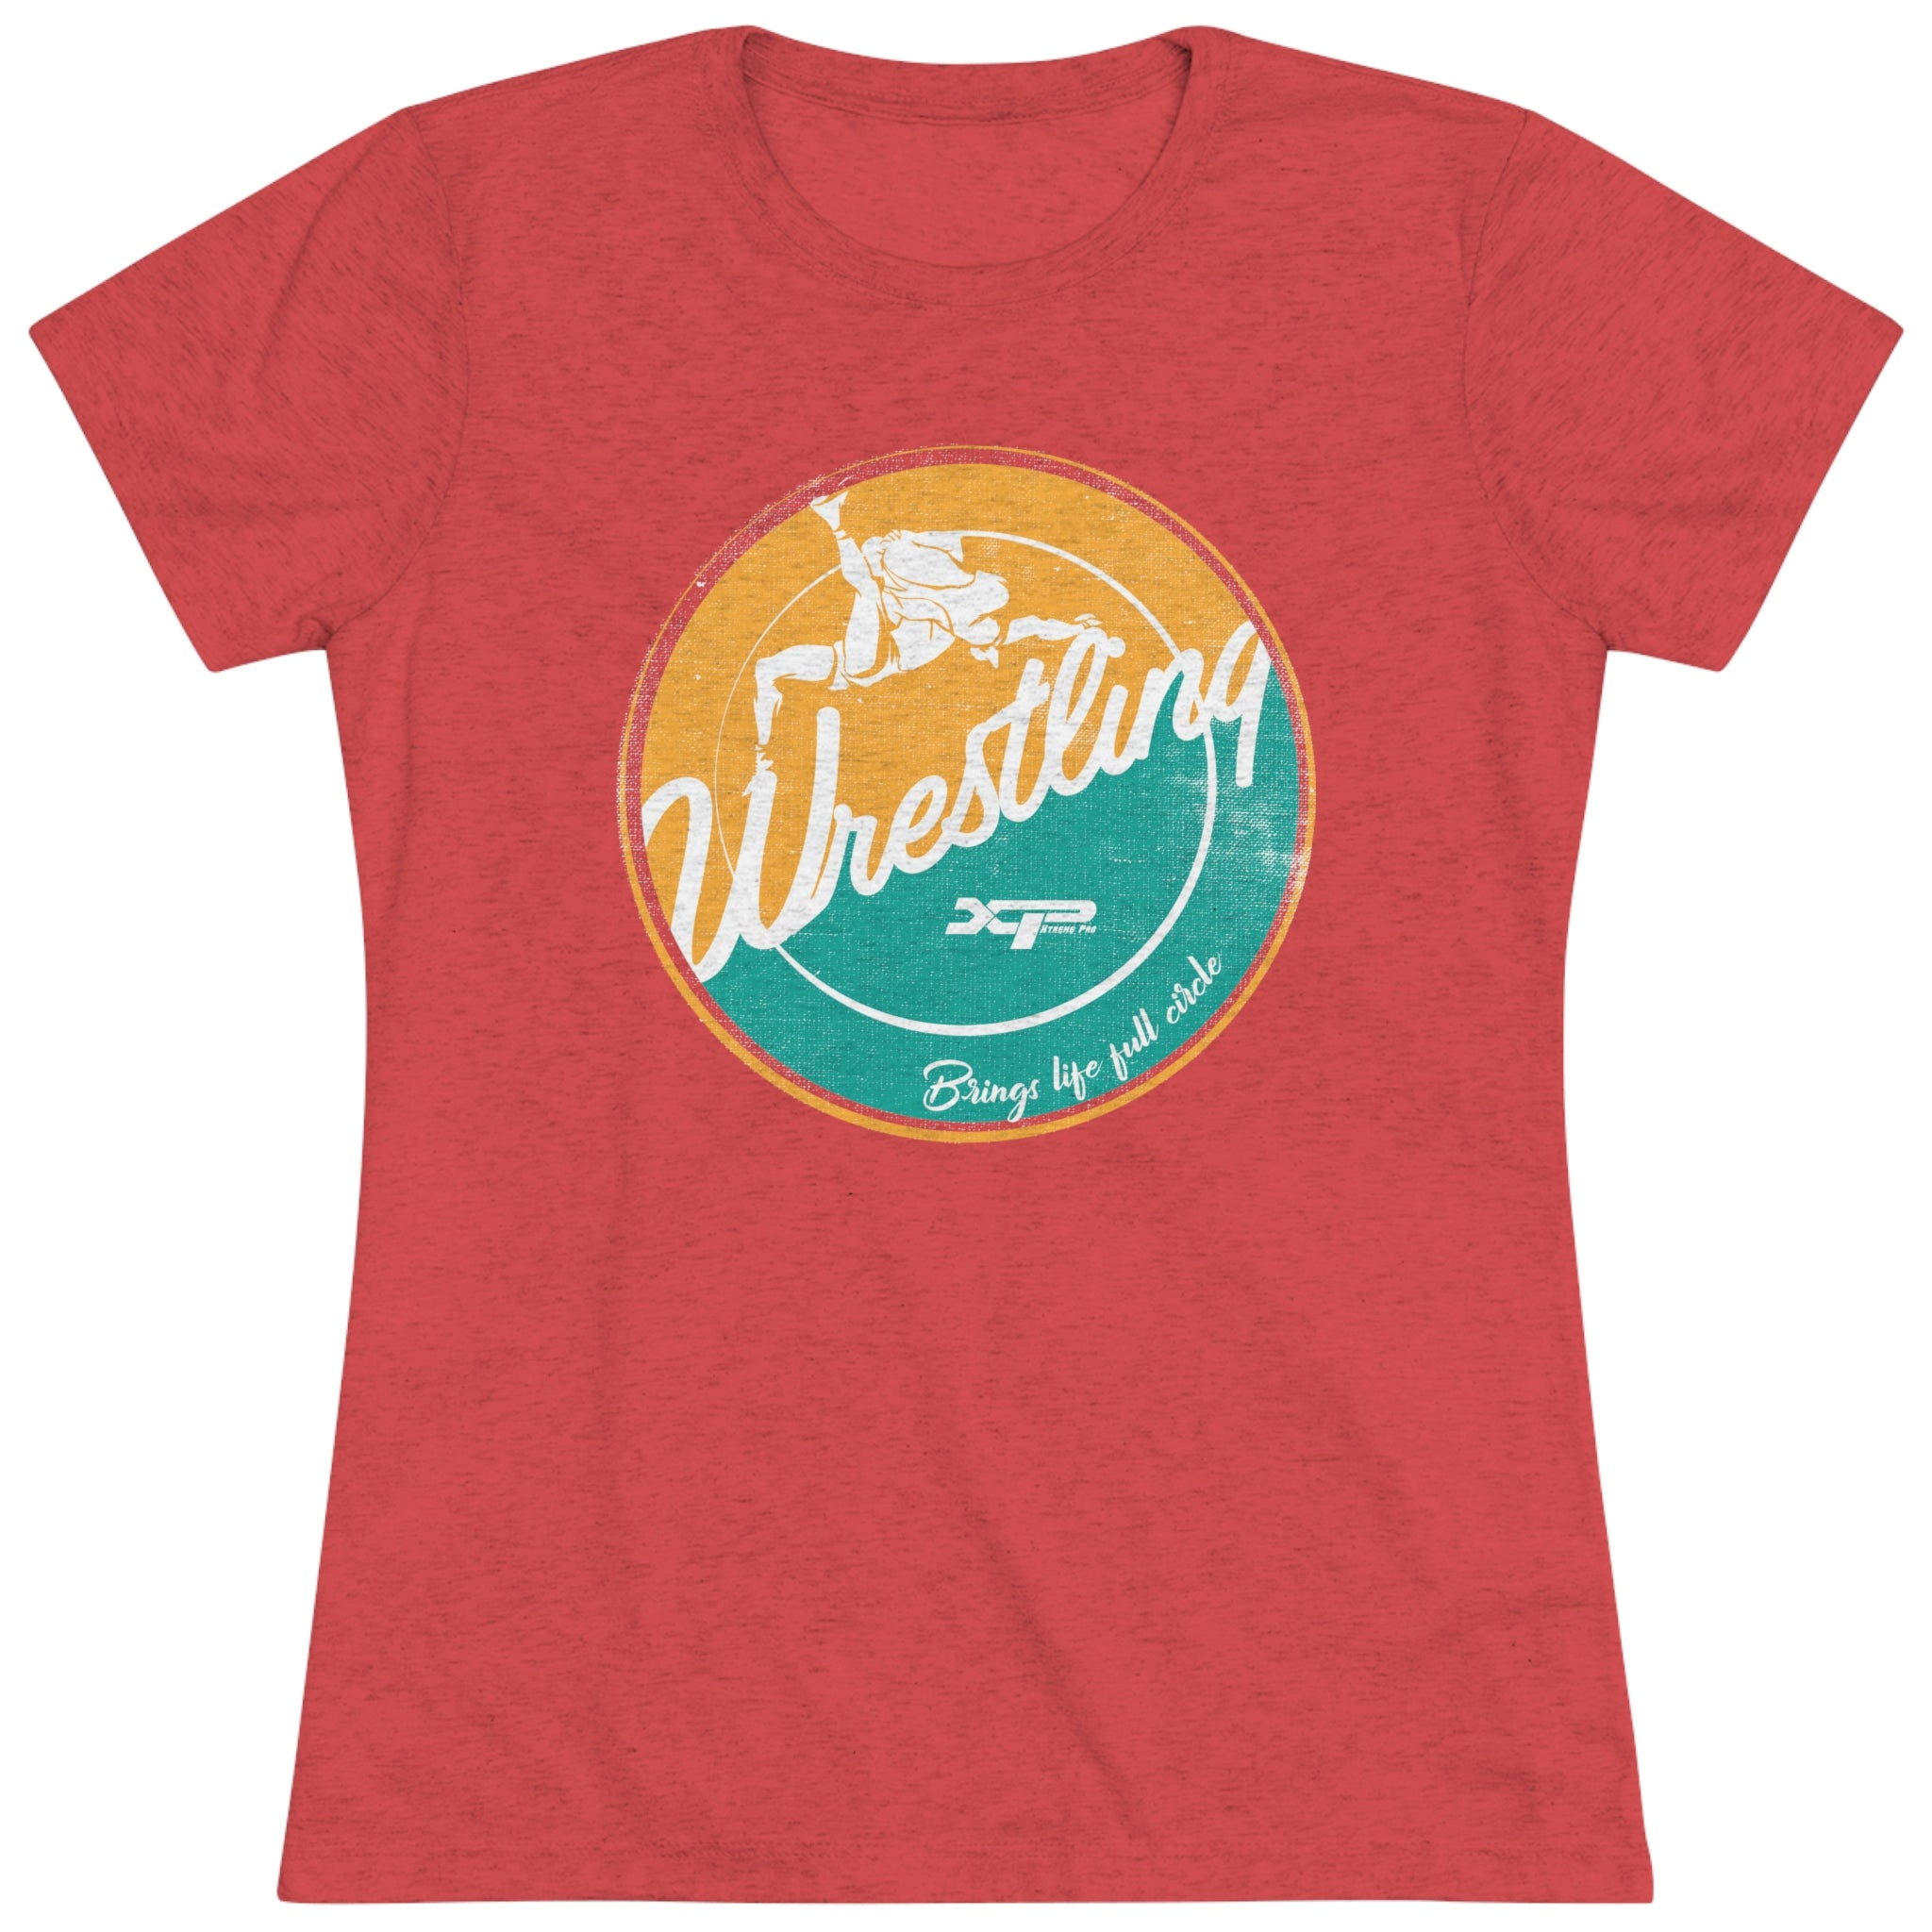 Wrestling Brings Life Full Circle Women's Triblend Tee by XPA Gear